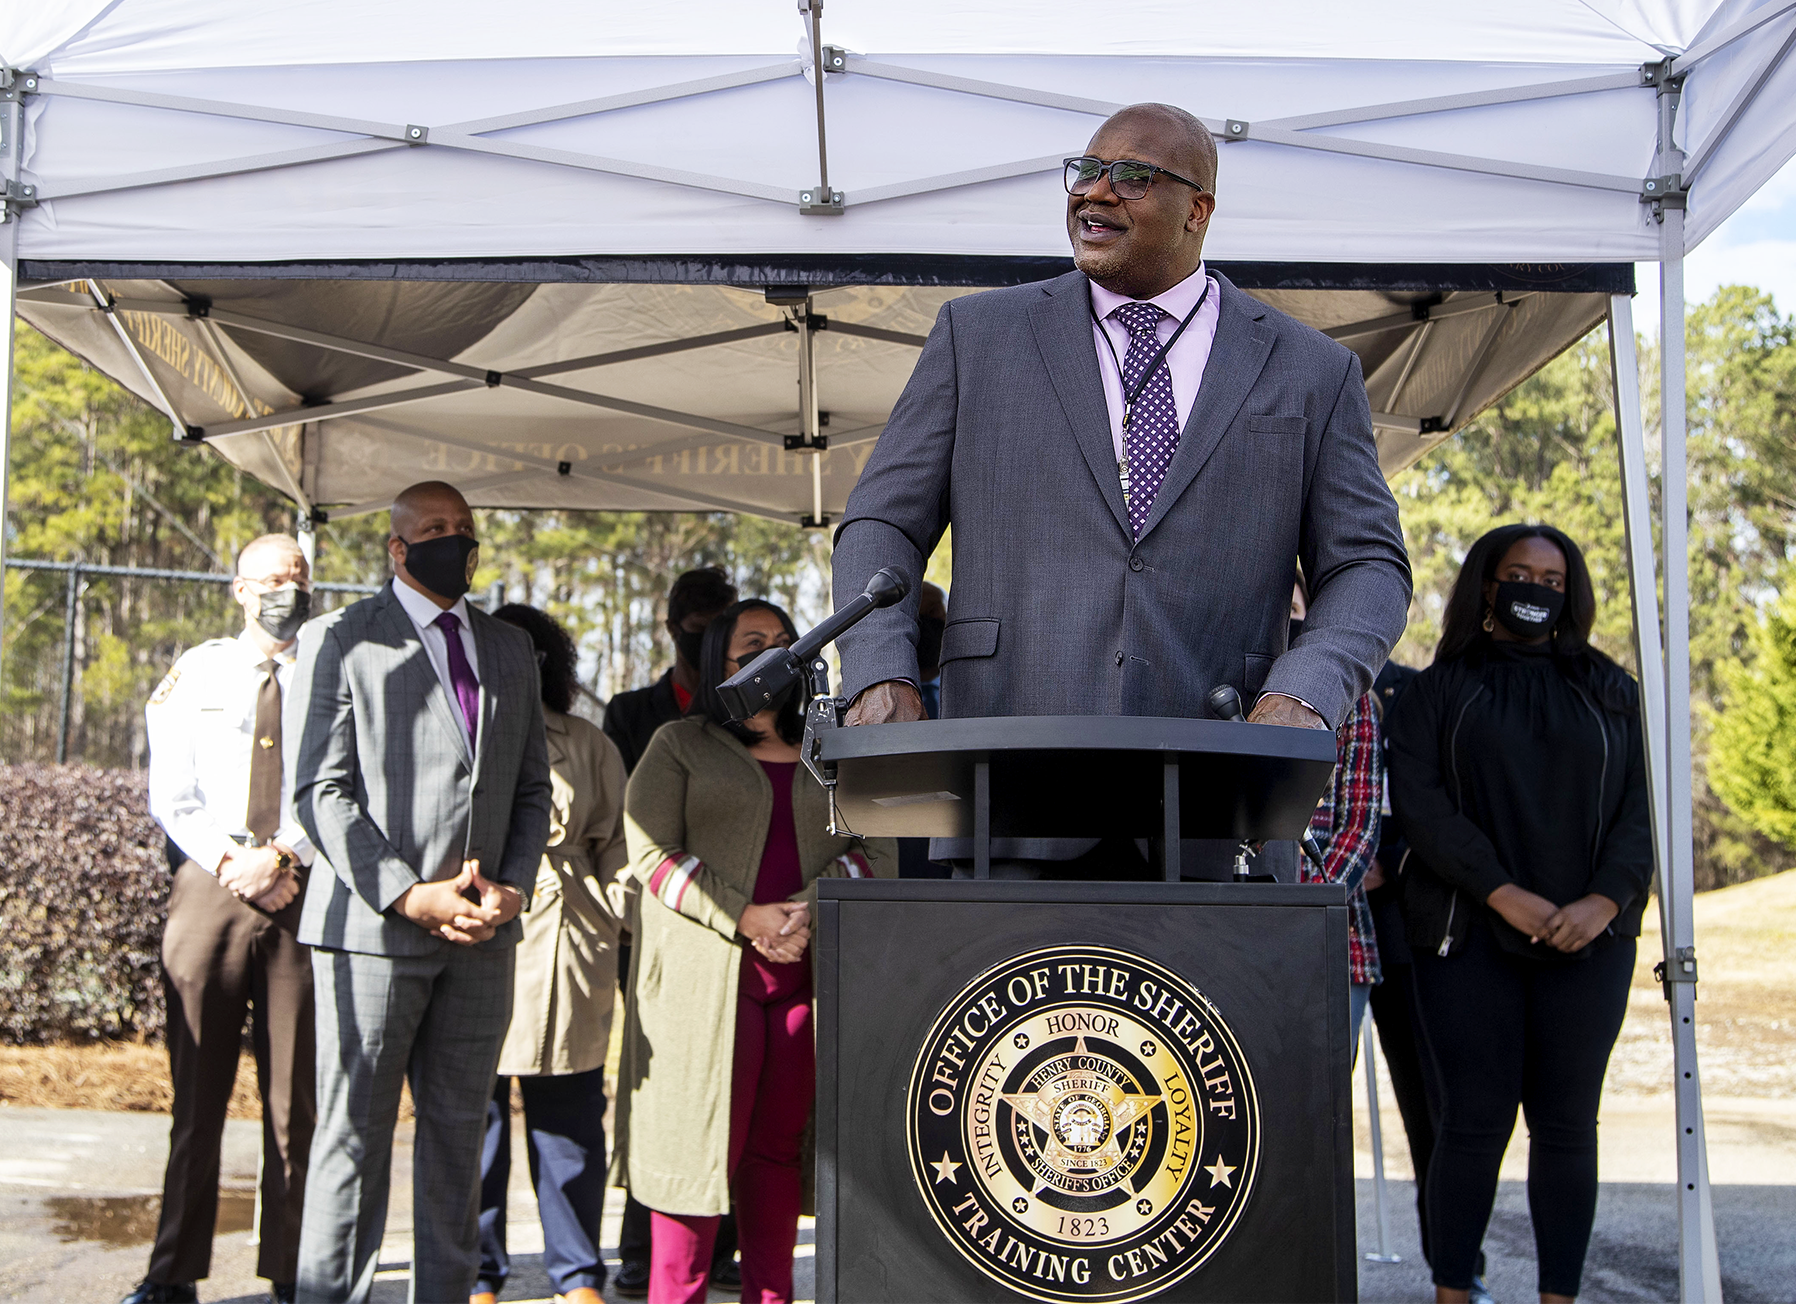 basketball hall of famer shaquille o'neal speaks at a press conference in mcdonough, ga, friday, jan 22, 2021, after being named henry county sheriff's office director of community relations by henry county sheriff reginald scandrett alyssa pointeratlanta journal constitution via ap